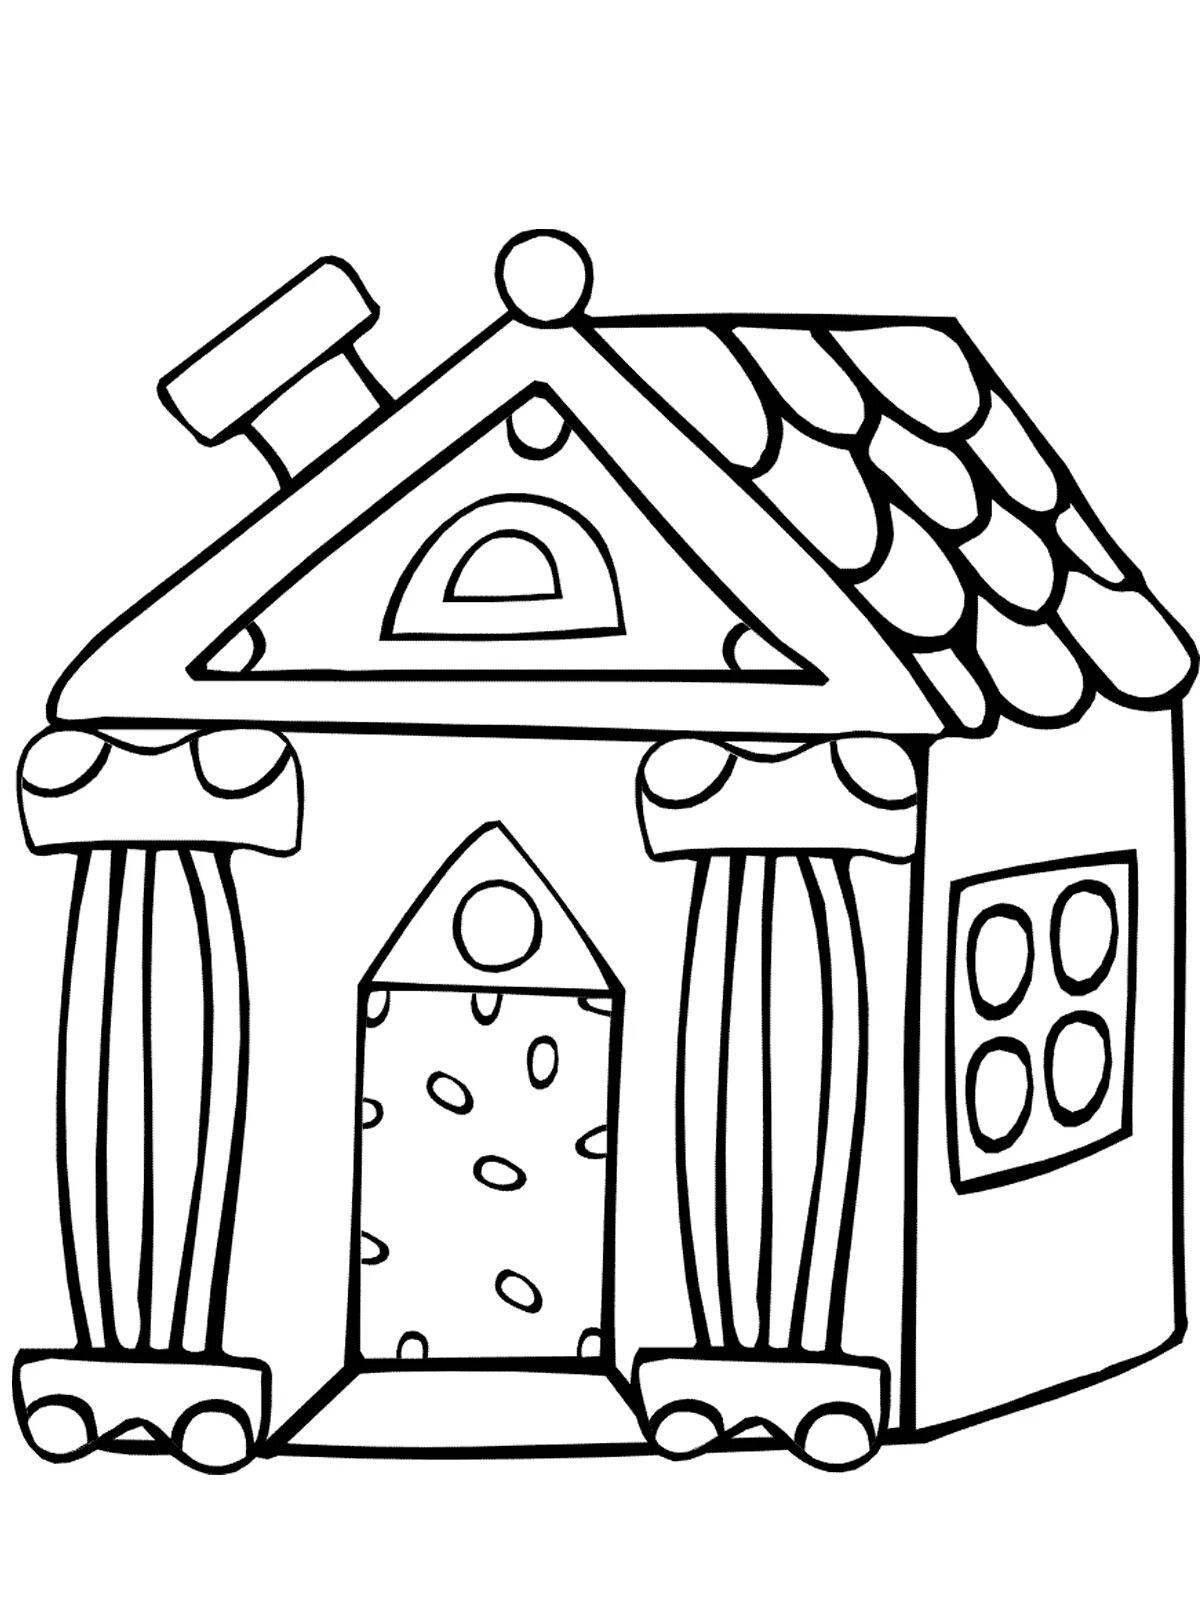 Exquisite house coloring for 2-3 year olds